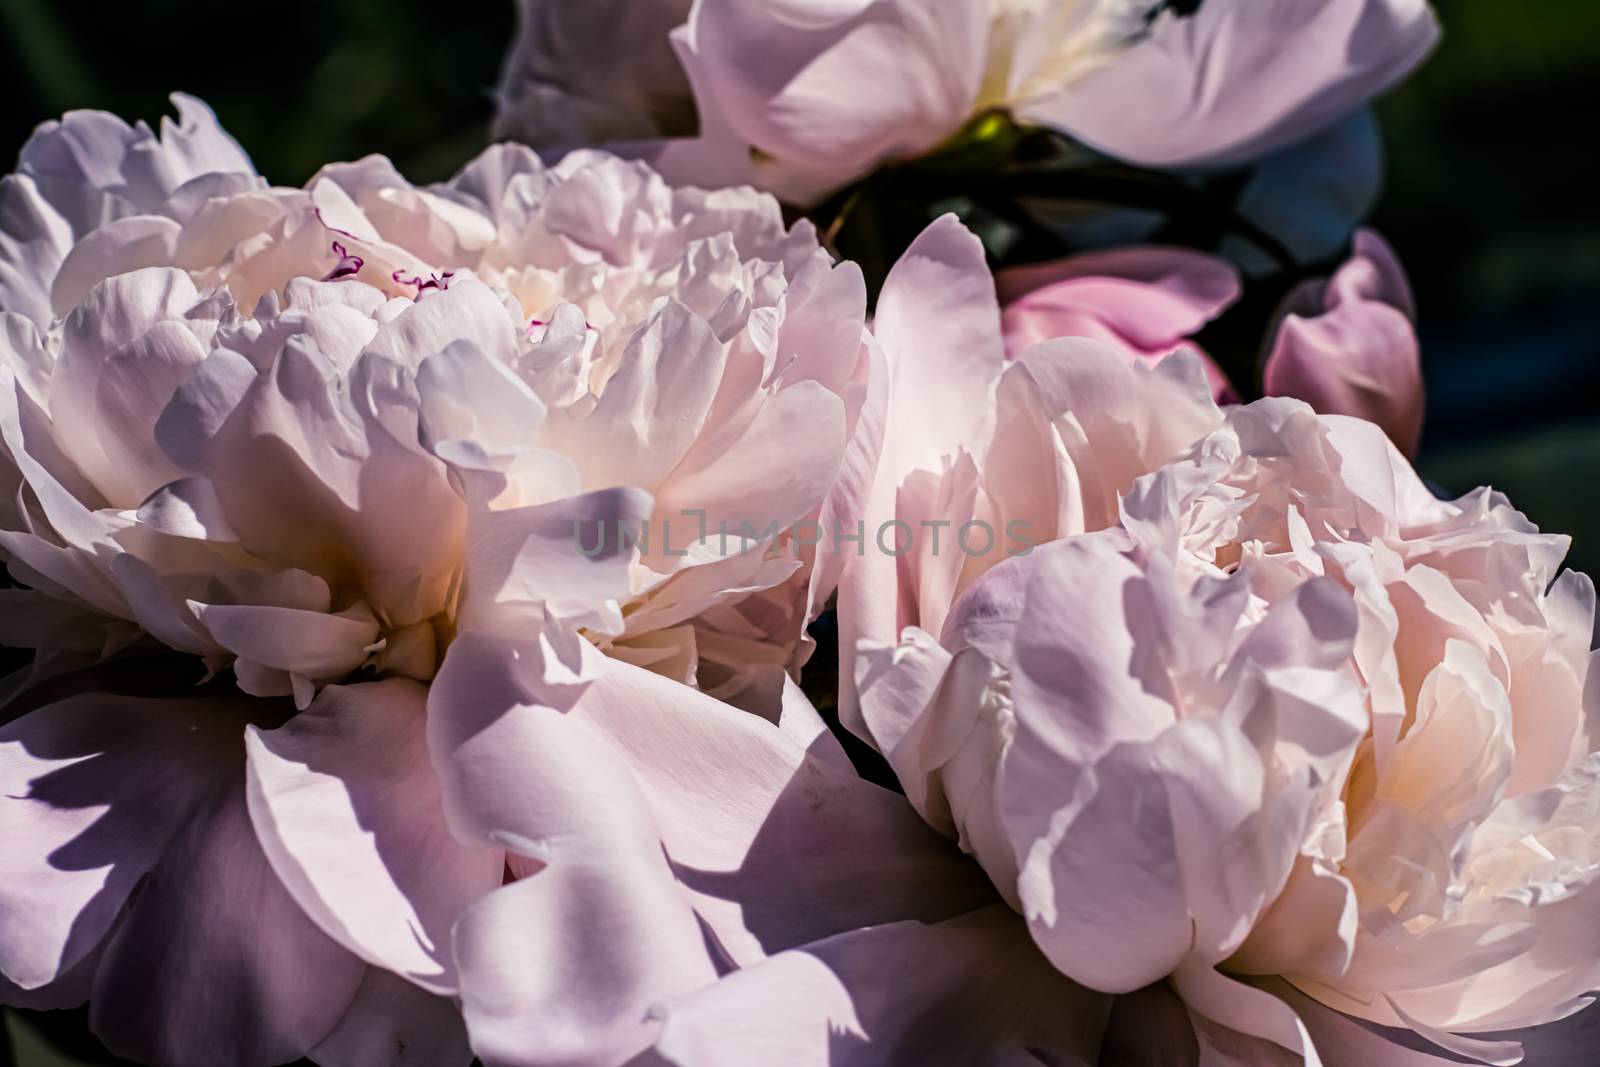 Peony flowers as luxury floral art background, wedding decor and event branding design